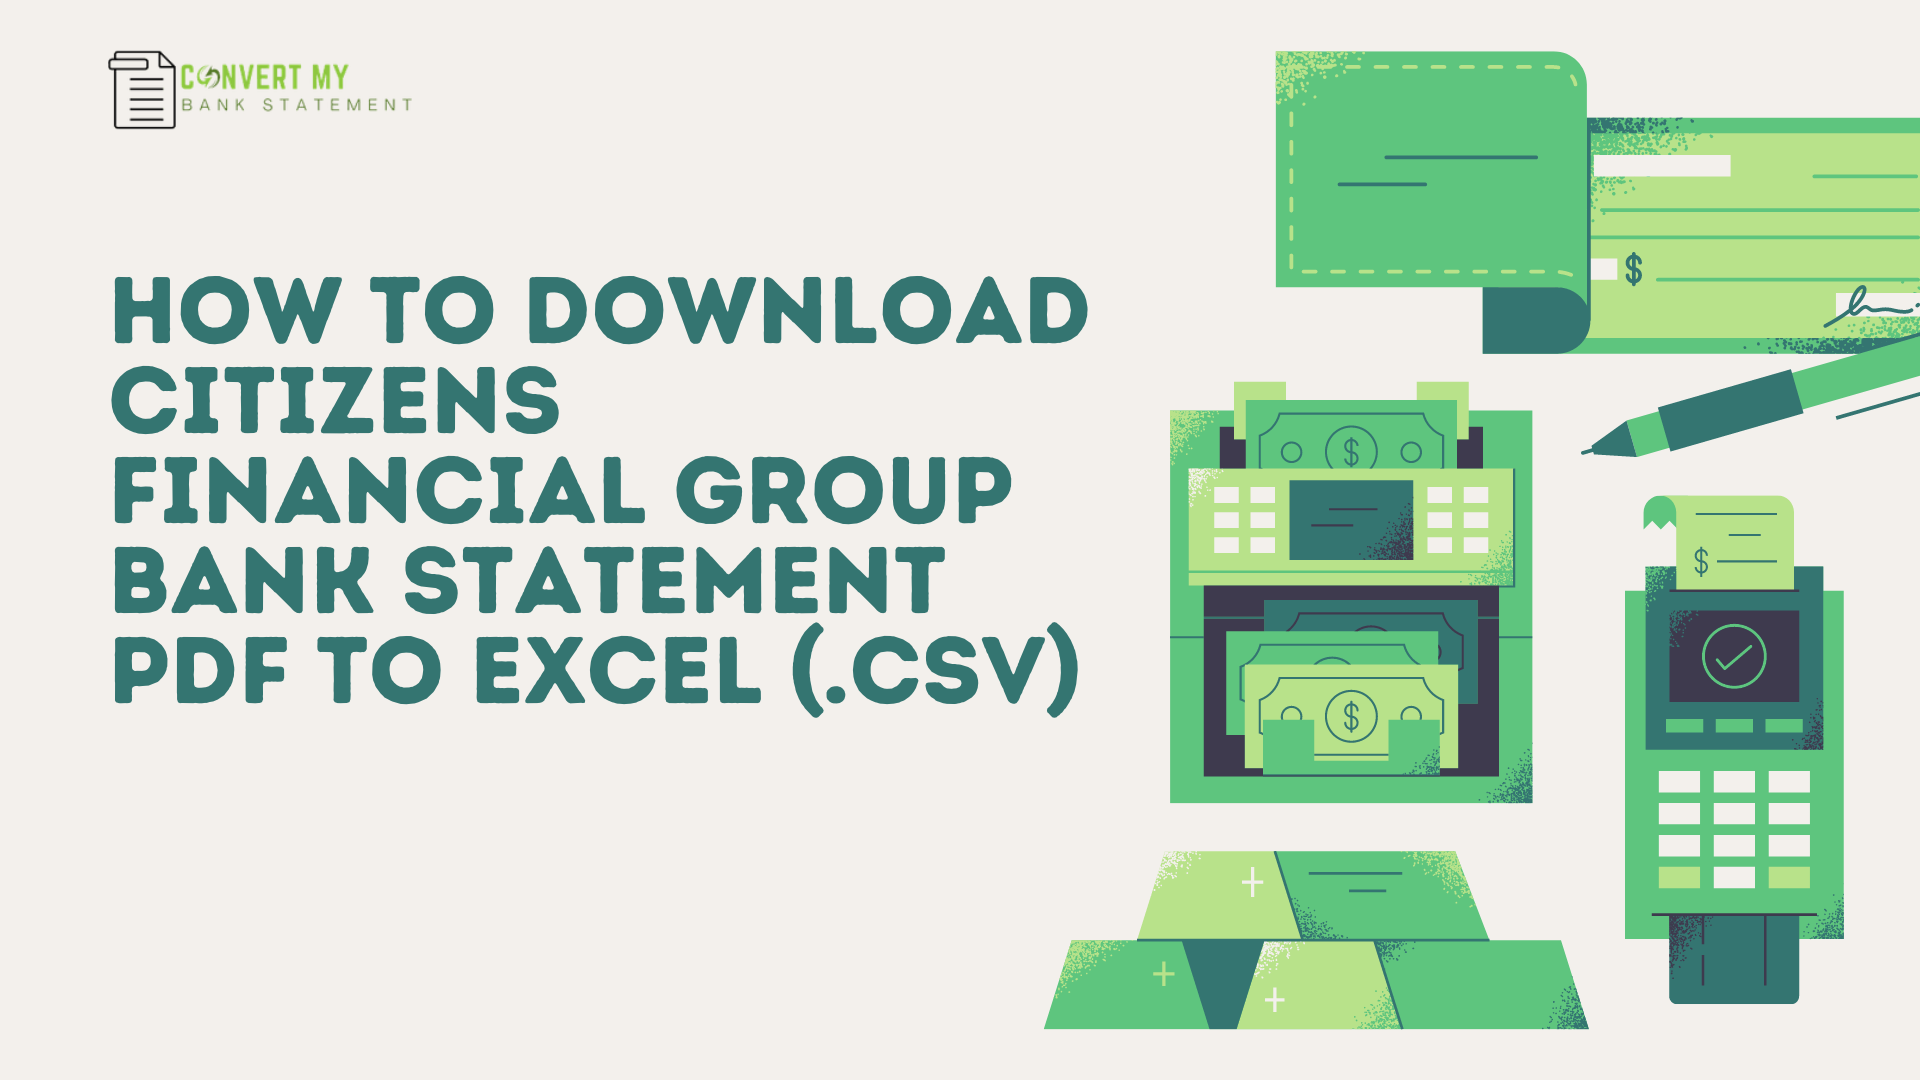 How to Download Citizens Financial Group Bank Statement PDF to Excel or CSV